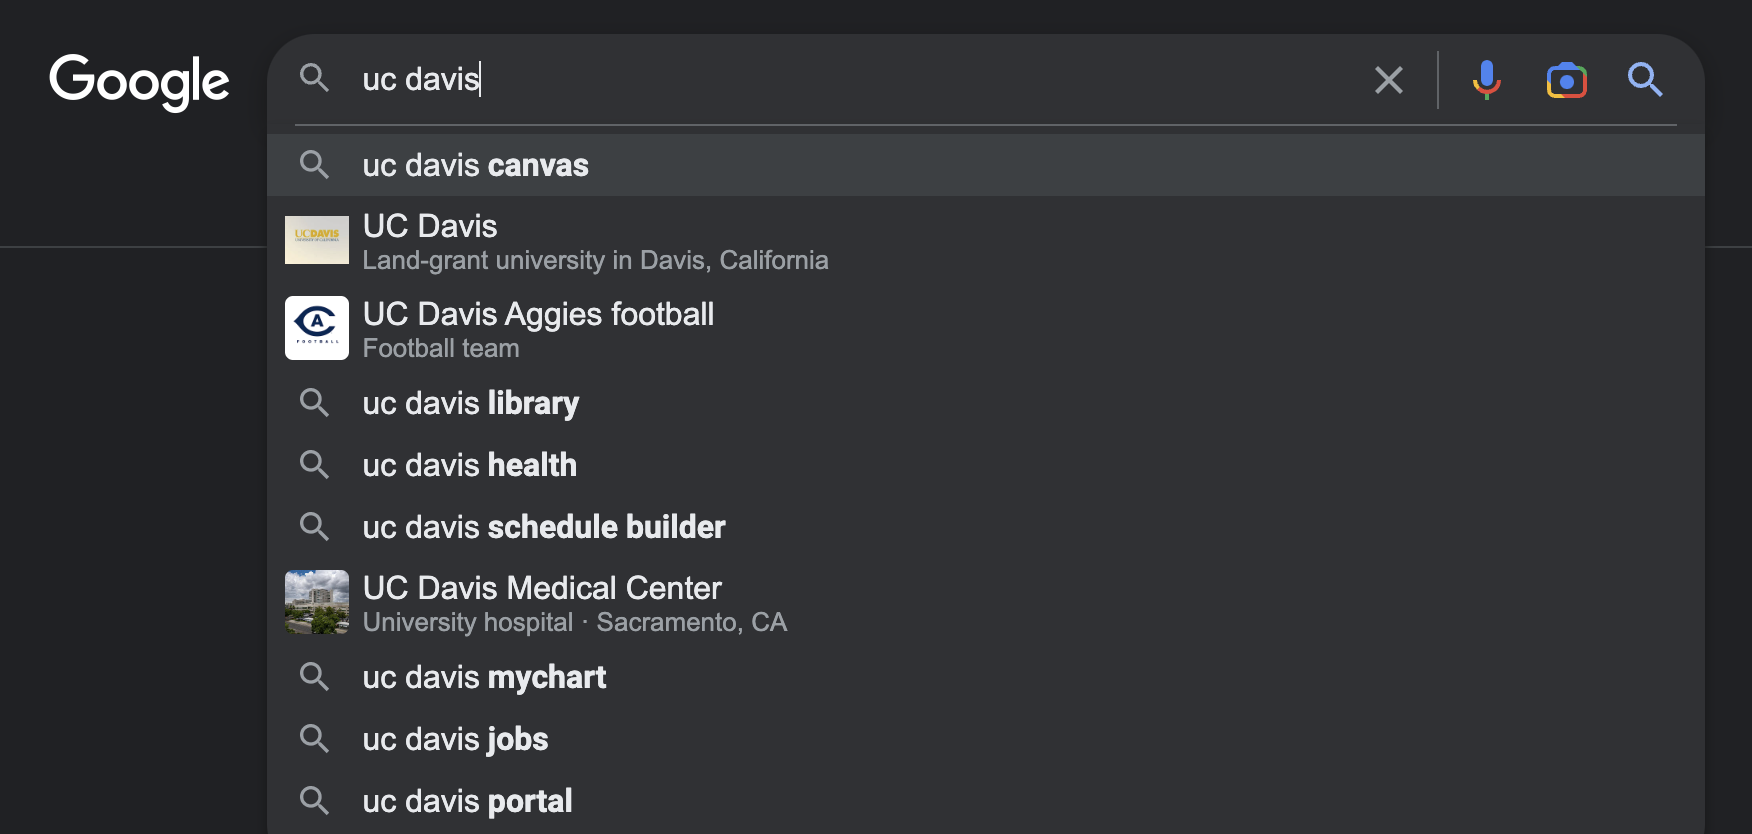 A screenshot of Google autocomplete using the example "uc davis."